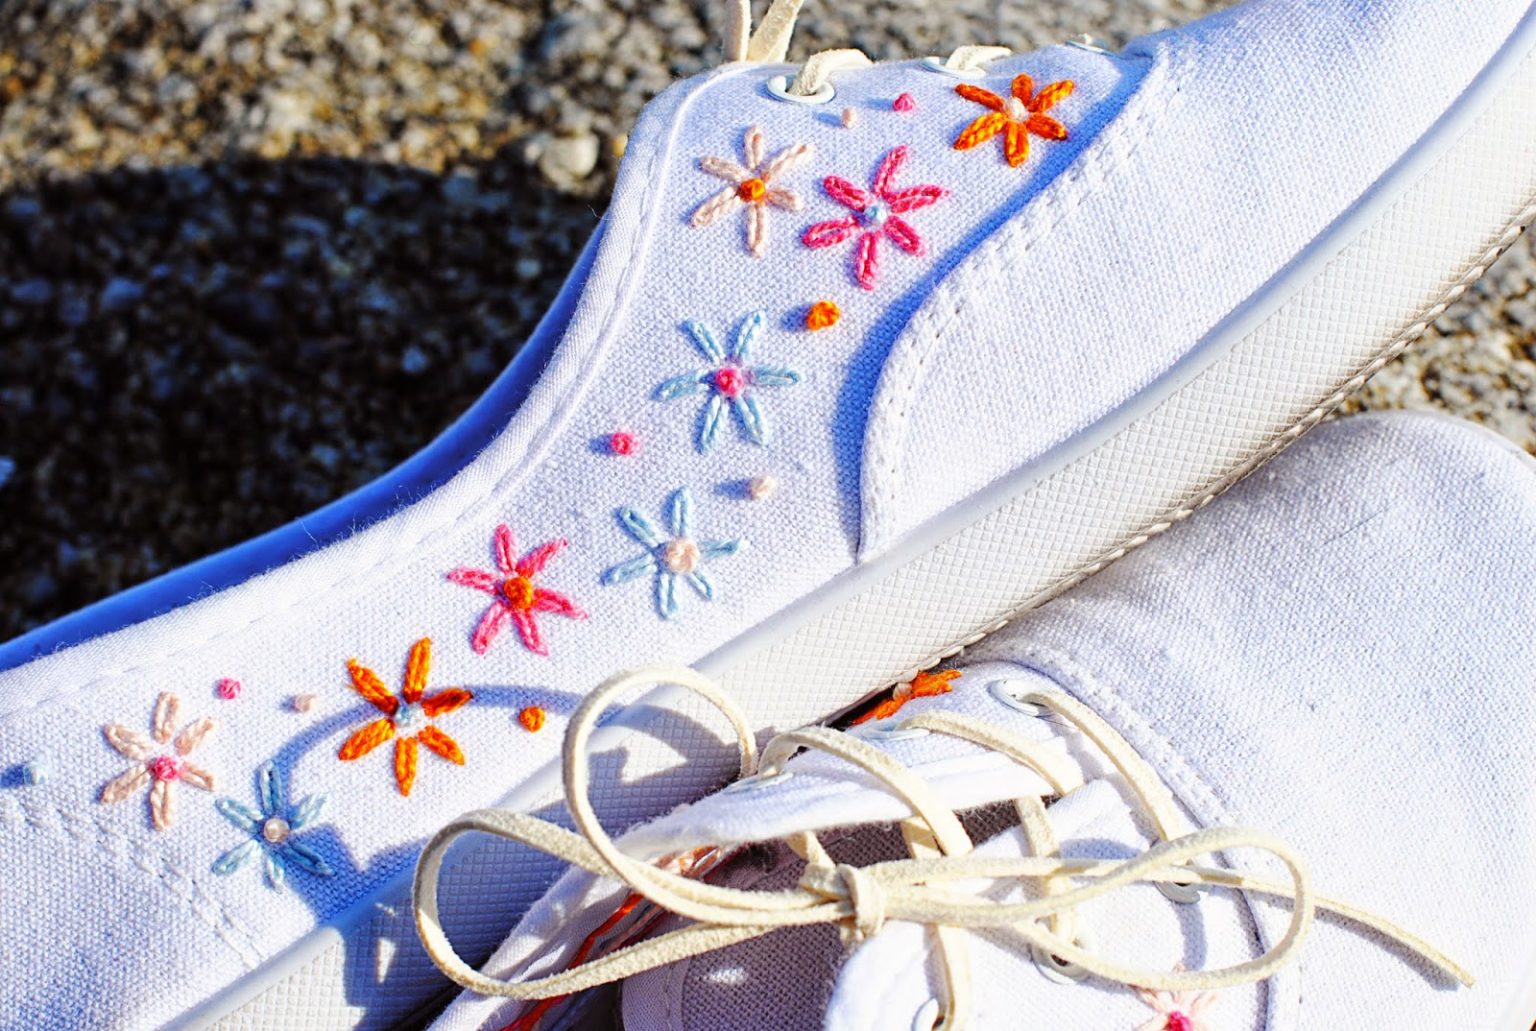 DIY Shoes: 19 Ways to Decorate, Embellish, and Spice Up Your Kicks